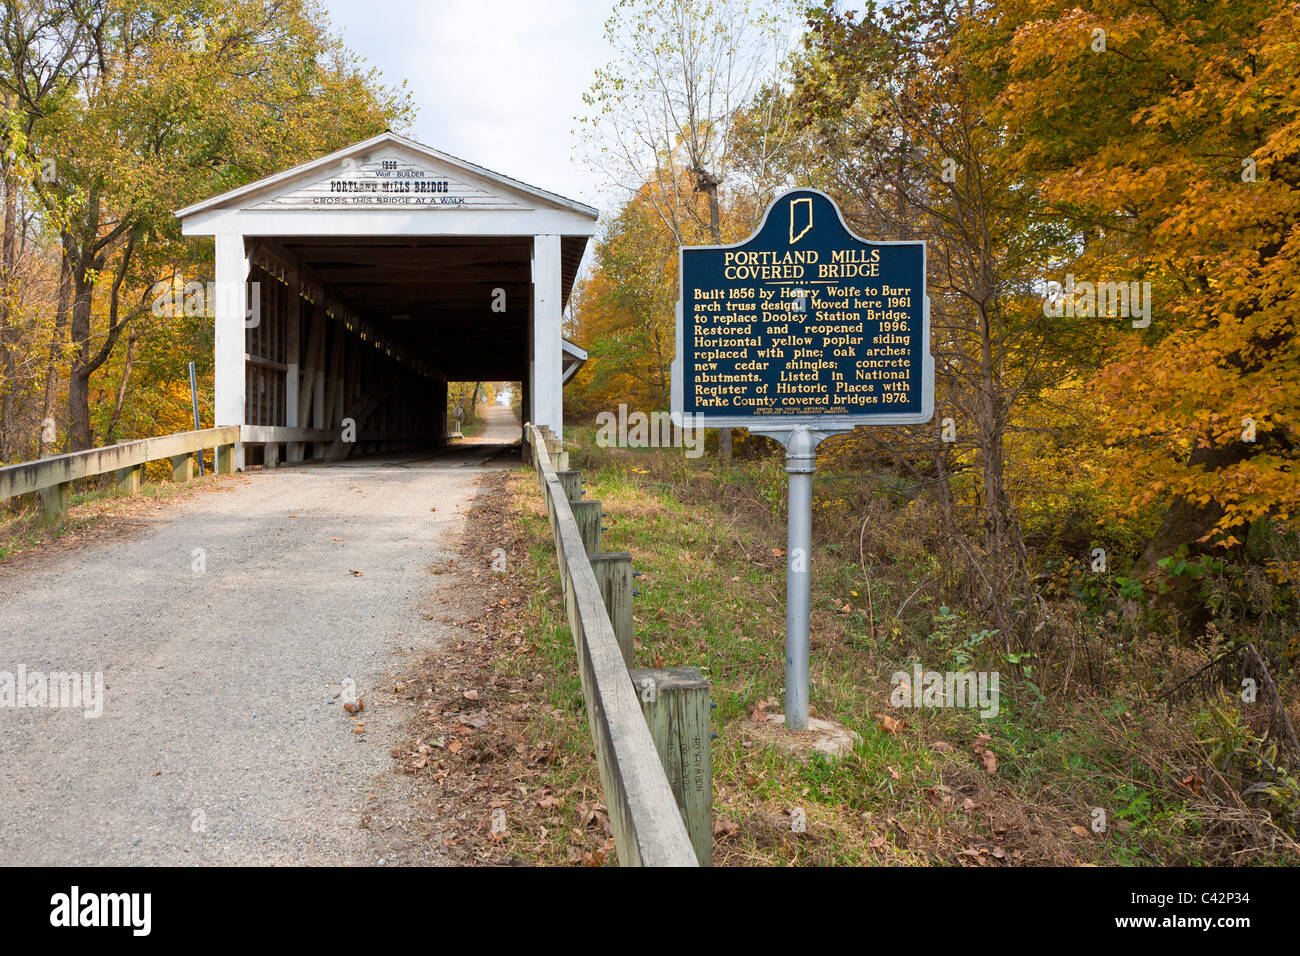 Portland Mills Covered Bridge, built in 1856 near Guion in Parke County, Indiana, USA Stock Photo